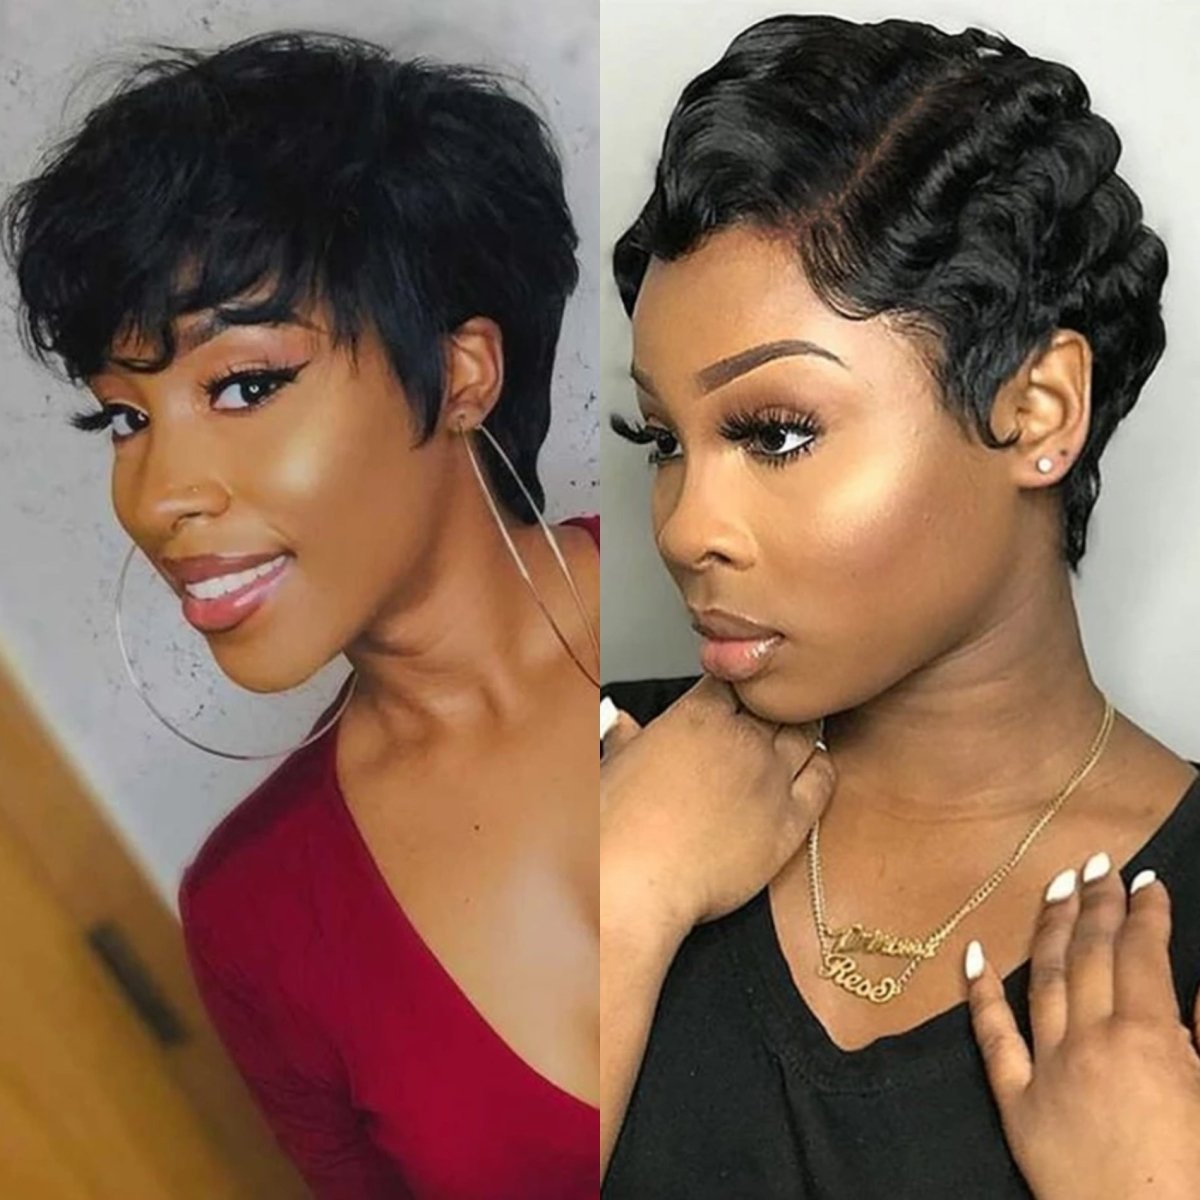 Buy 1 Get 1 Free︱Combo No.2 Razor Cut Pixie Wig And Finger Wave Wig - Superlovehair